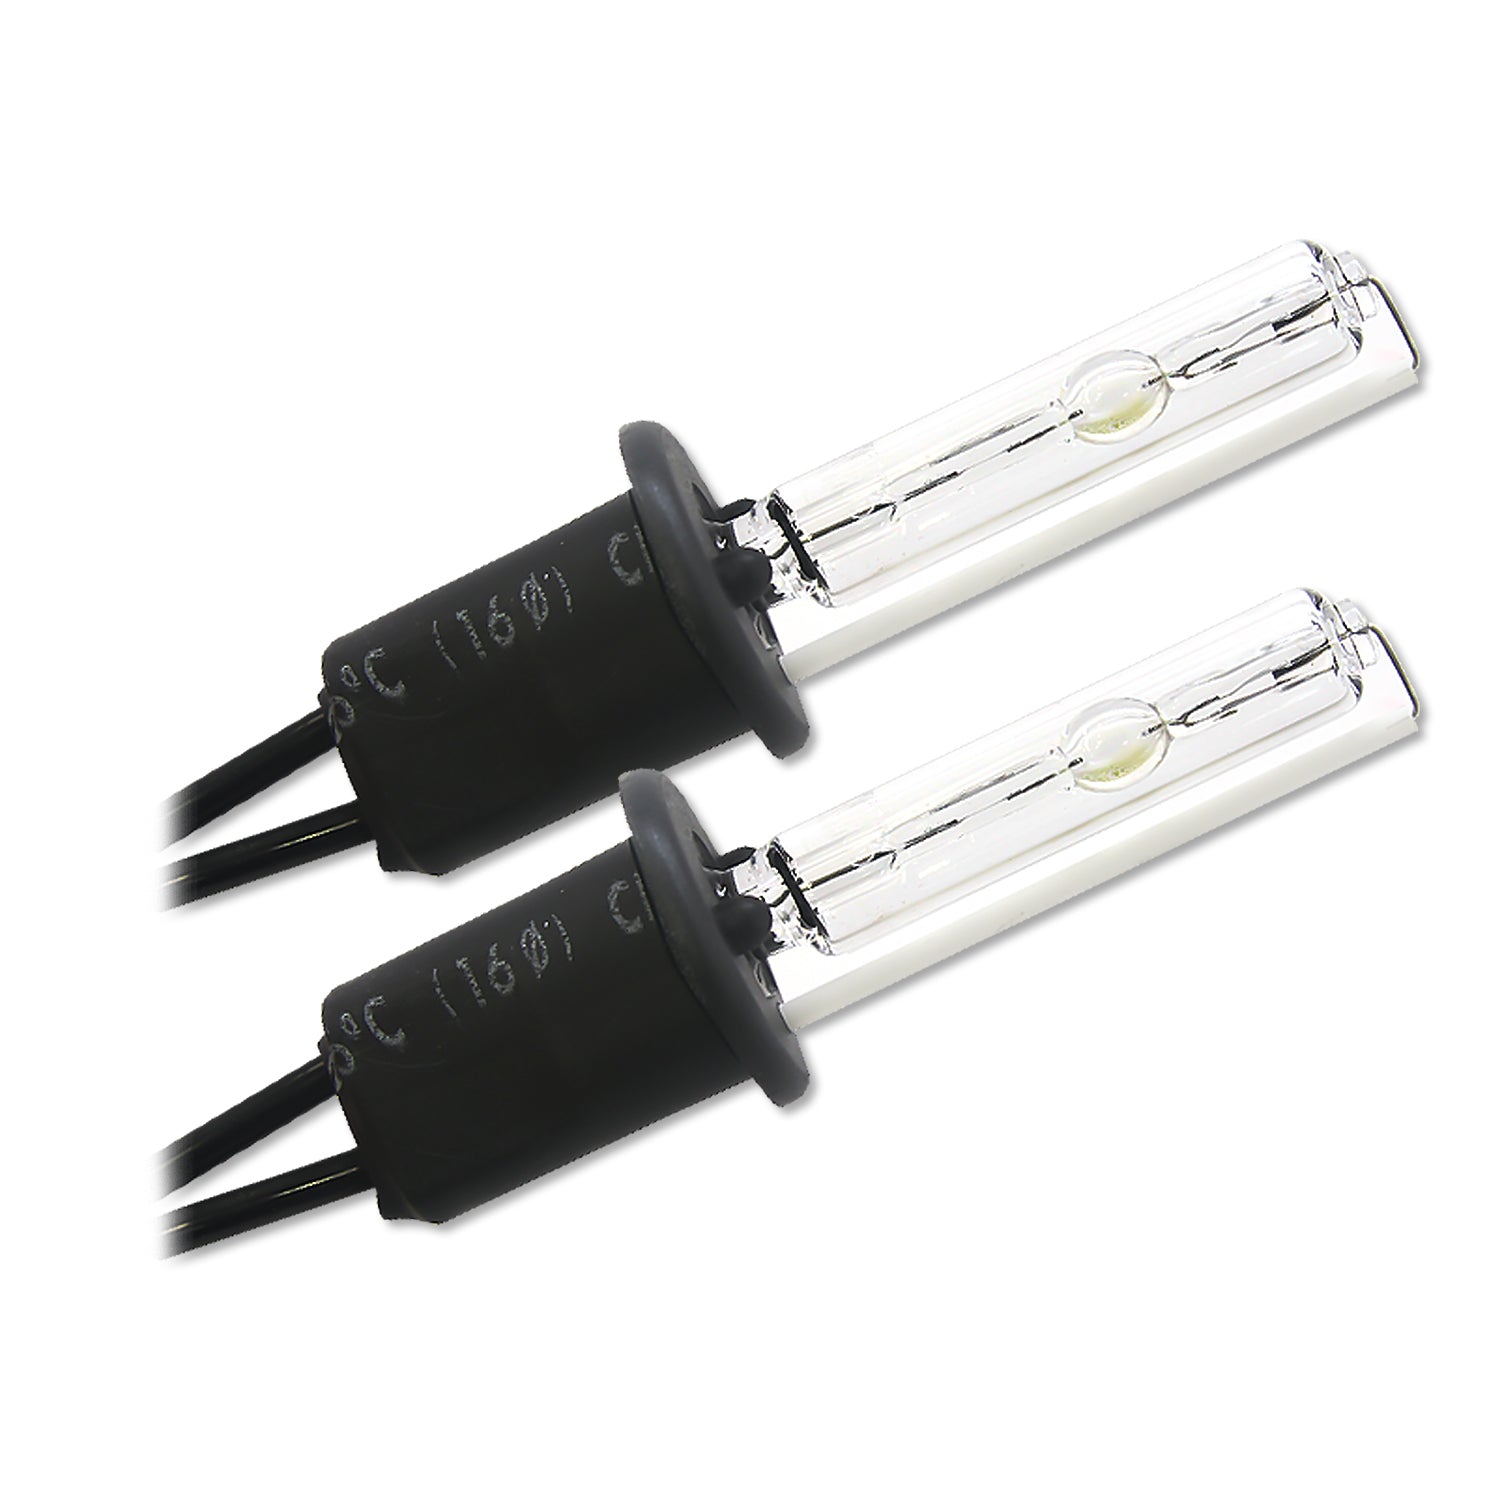 HYB 8000K 35W D2S Auto Xenon HID Headlight Replacement Bulb (Pack of 2)